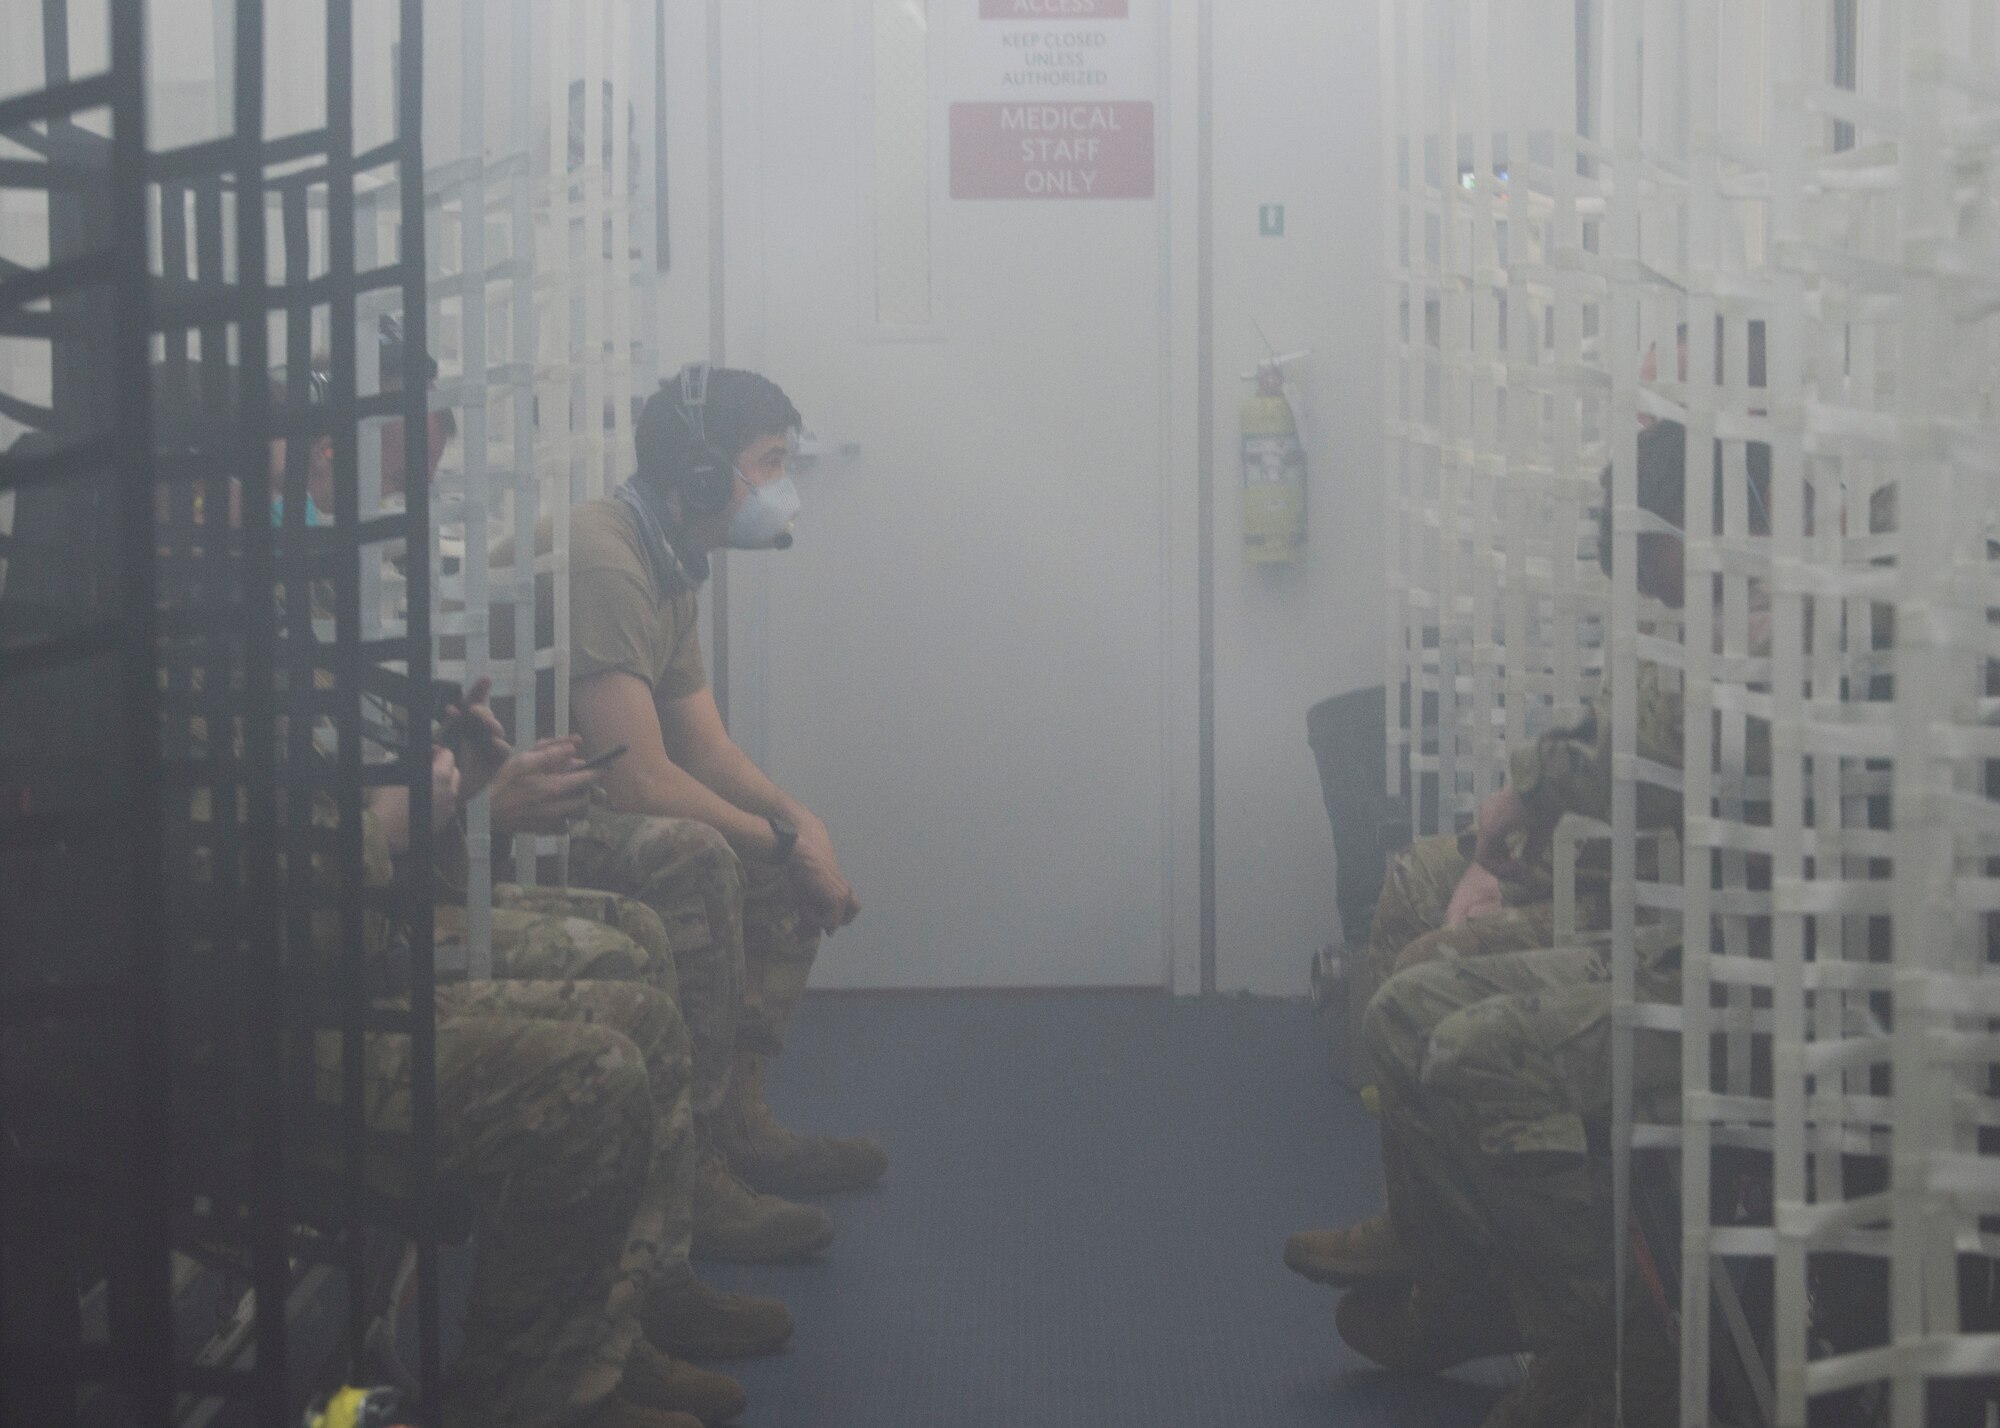 U.S. Airmen converse inside a Negatively Pressurized Conex prototype during in-flight testing on a C-17 Globemaster III, April 30, 2020. The NPC was rapidly developed and designed to fit inside both C-5 and C-17 aircraft to enable safe transport of up to 28 passengers, as well as teams of medical professionals to medical facilities around the globe. (U.S. Air Force photo by Staff Sgt. Chris Drzazgowski)